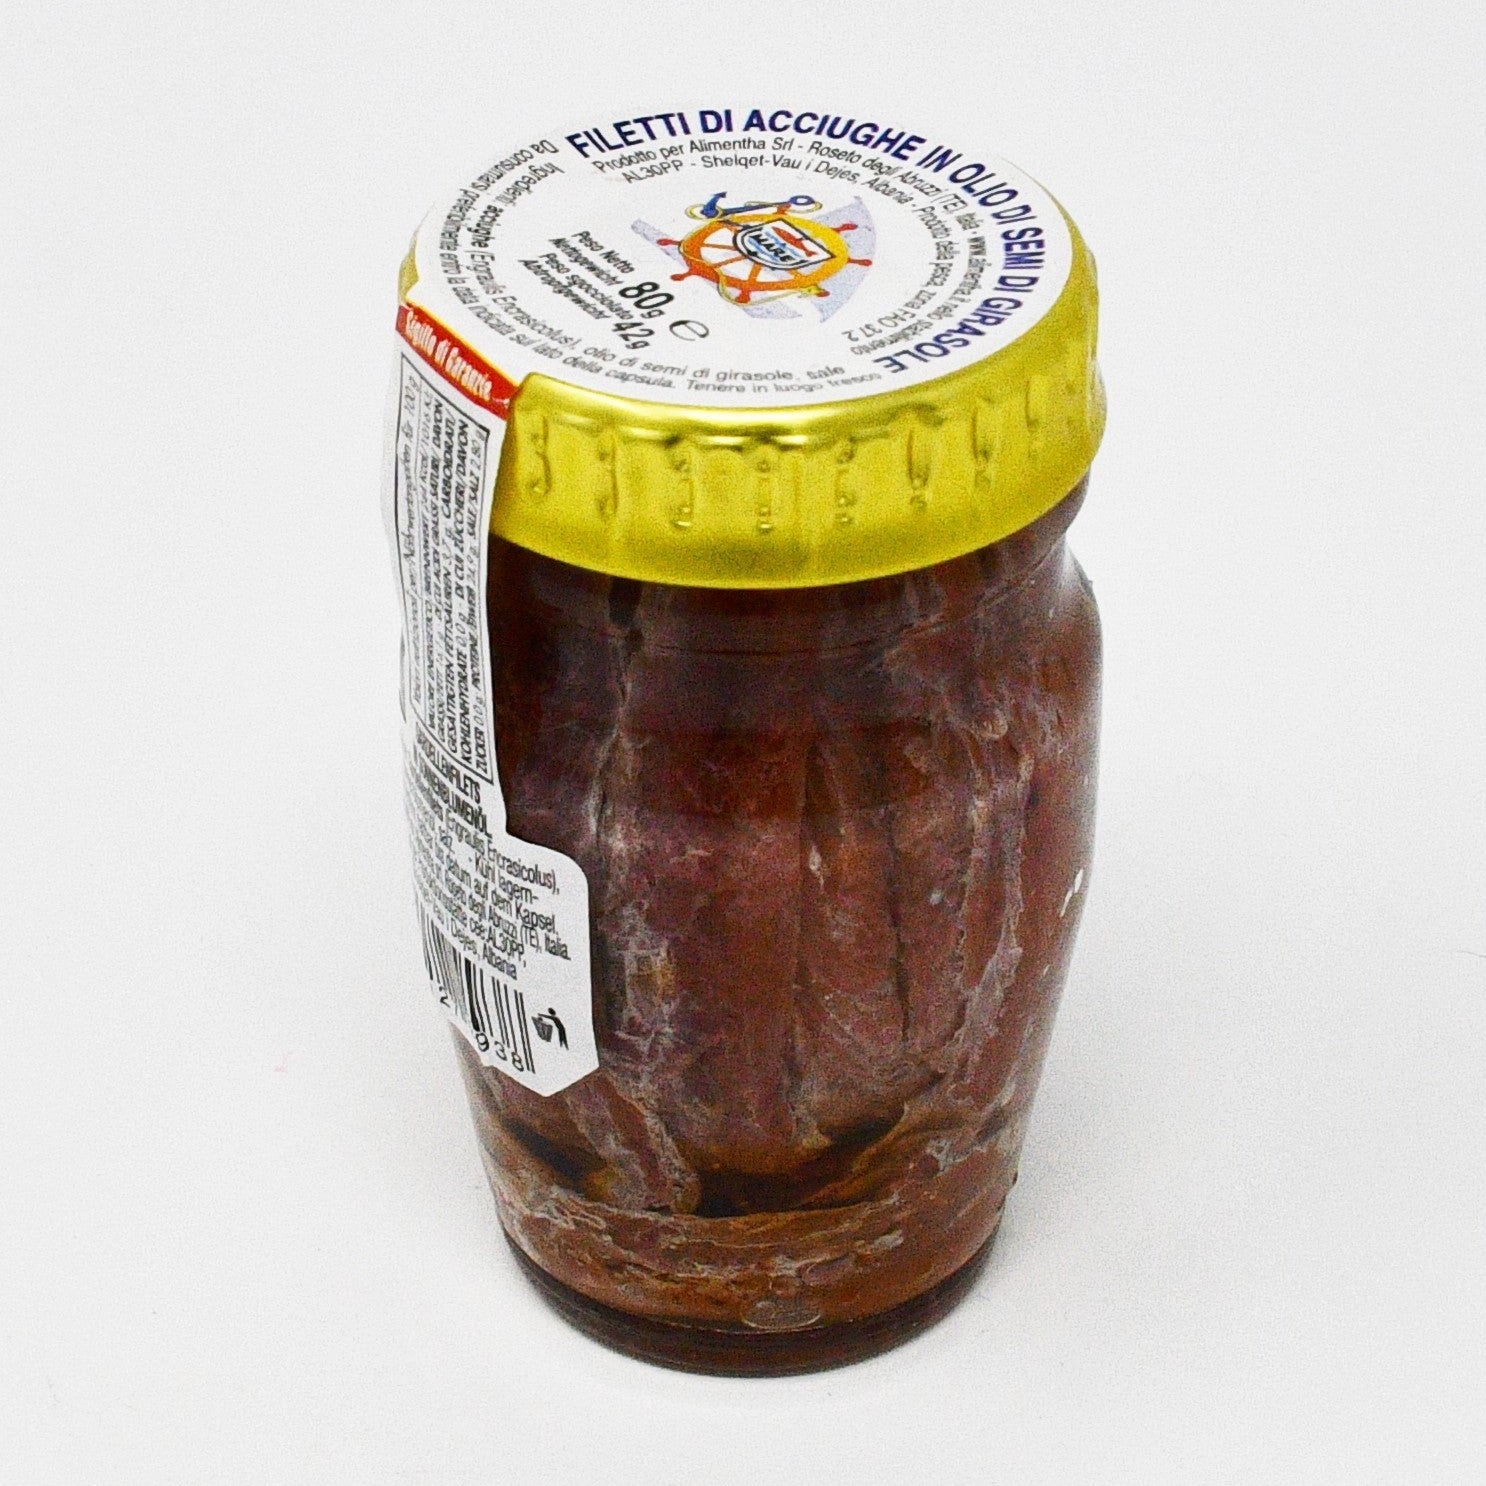 ANCHOVY FILLETS IN OIL (80g)